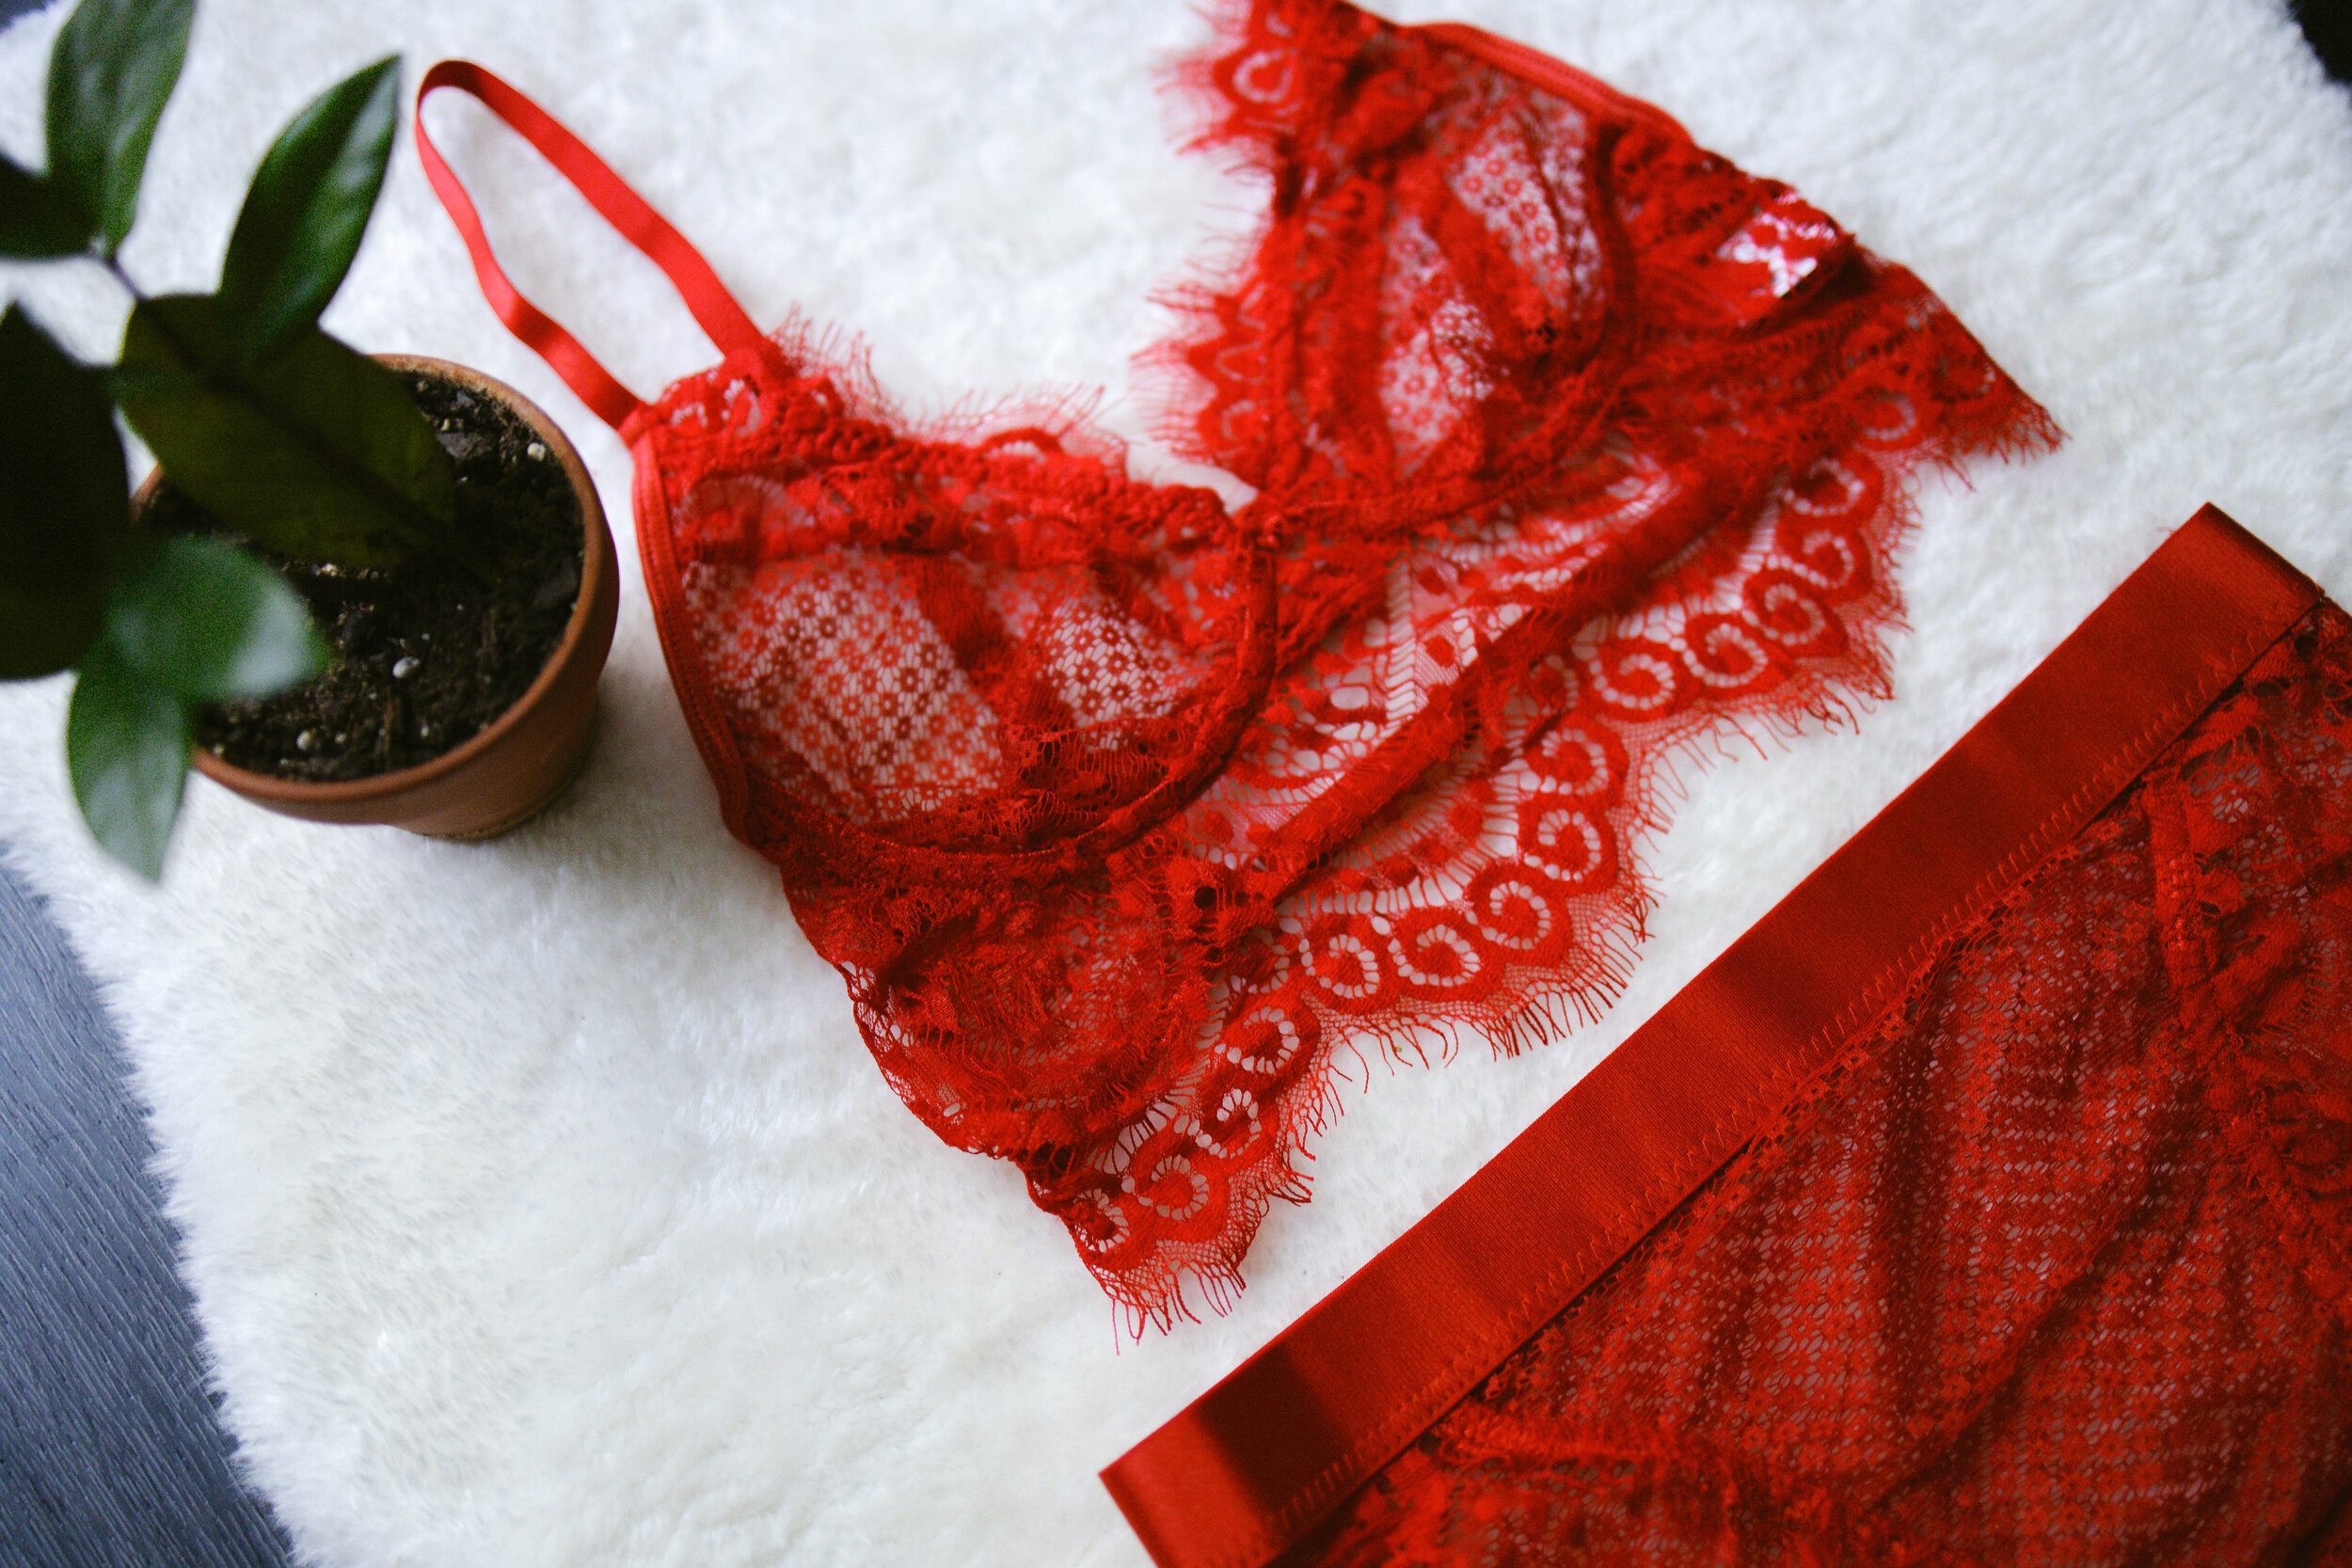 Best Places to Buy Lingerie for Your Boudoir Photoshoot